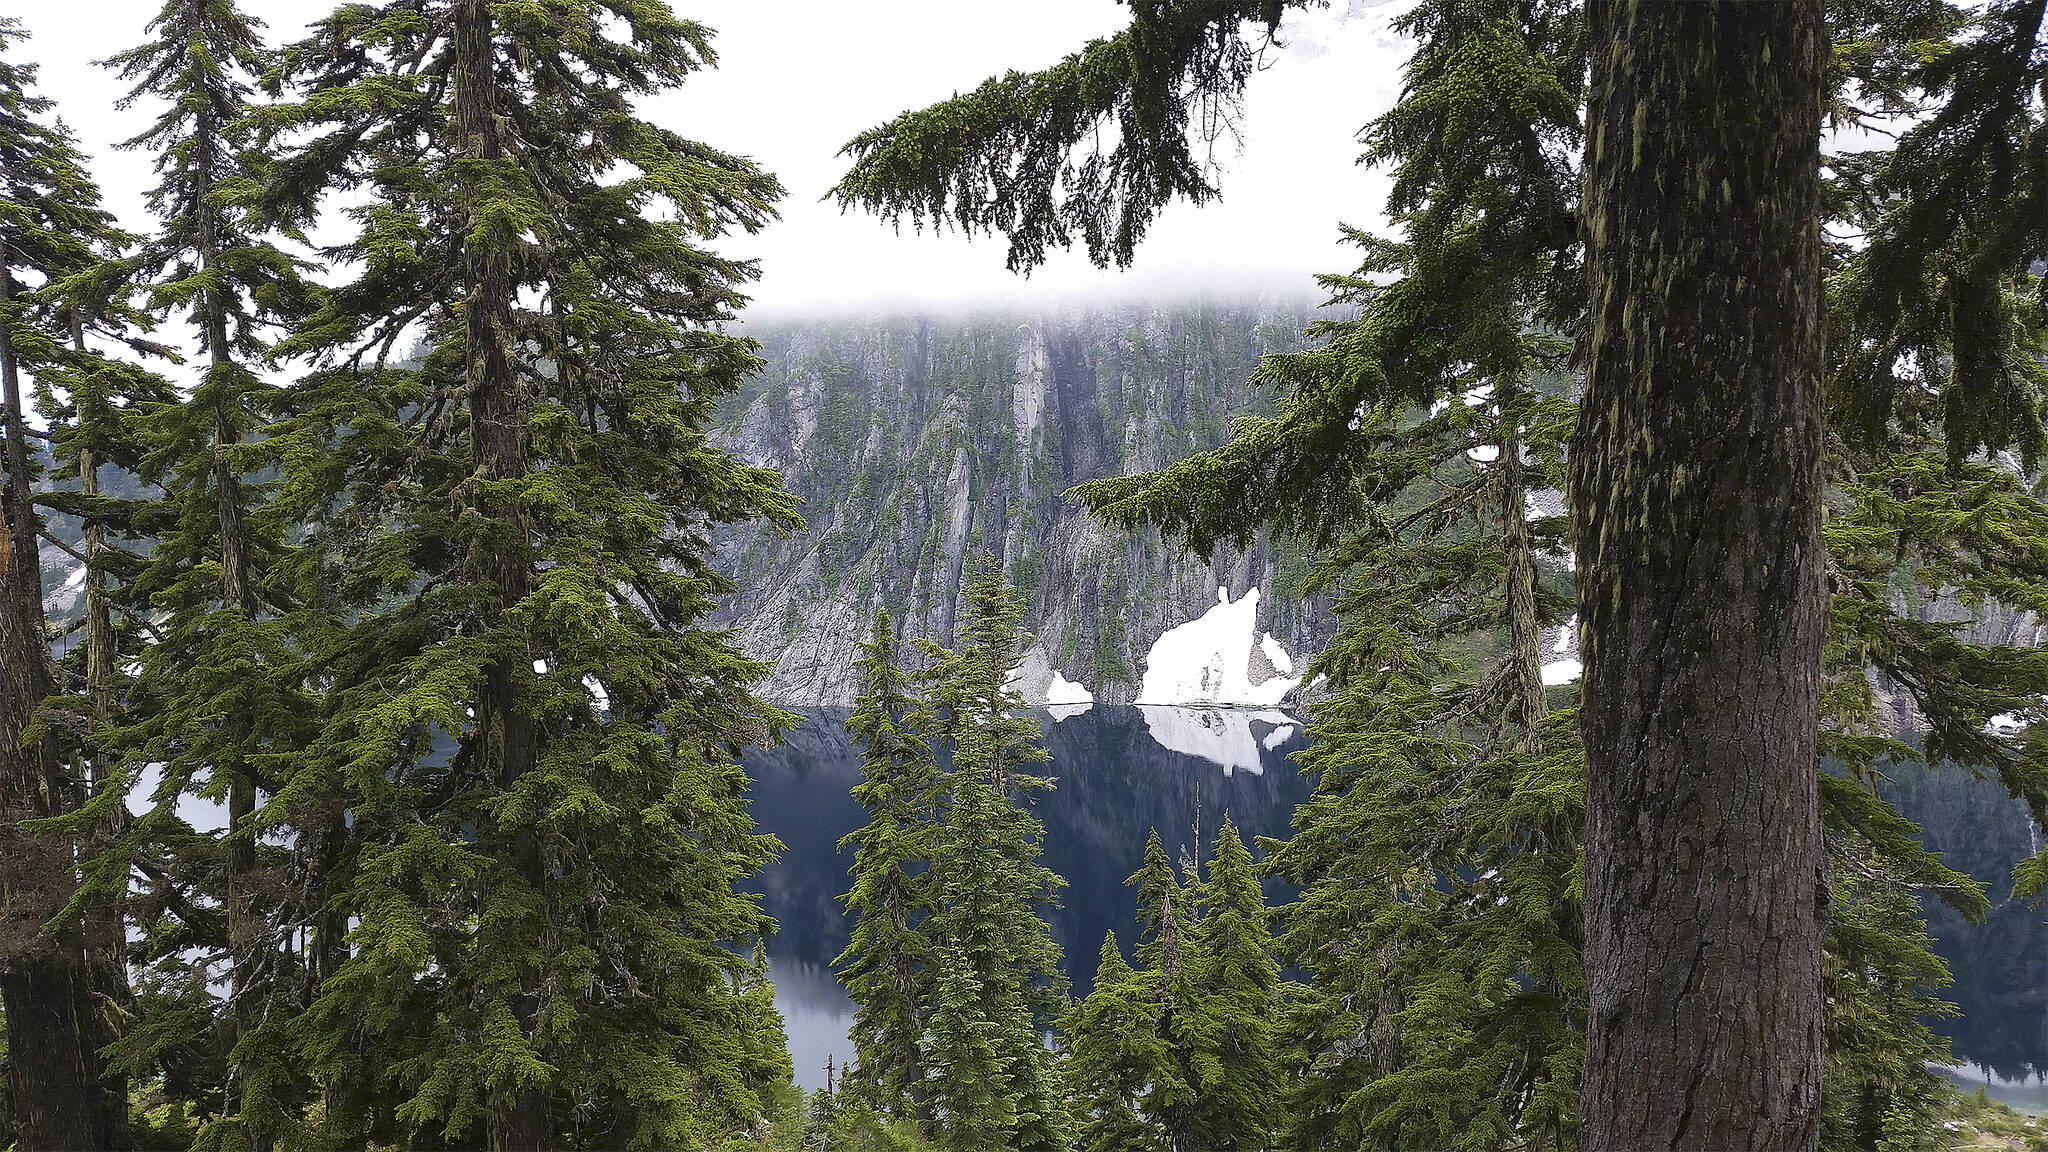 Snow Lake, located near Snoqualmie Pass in Mt. Baker-Snoqualmie National Forest. File photo
File photo
Snow Lake, located near Snoqualmie Pass in Mt. Baker-Snoqualmie National Forest.